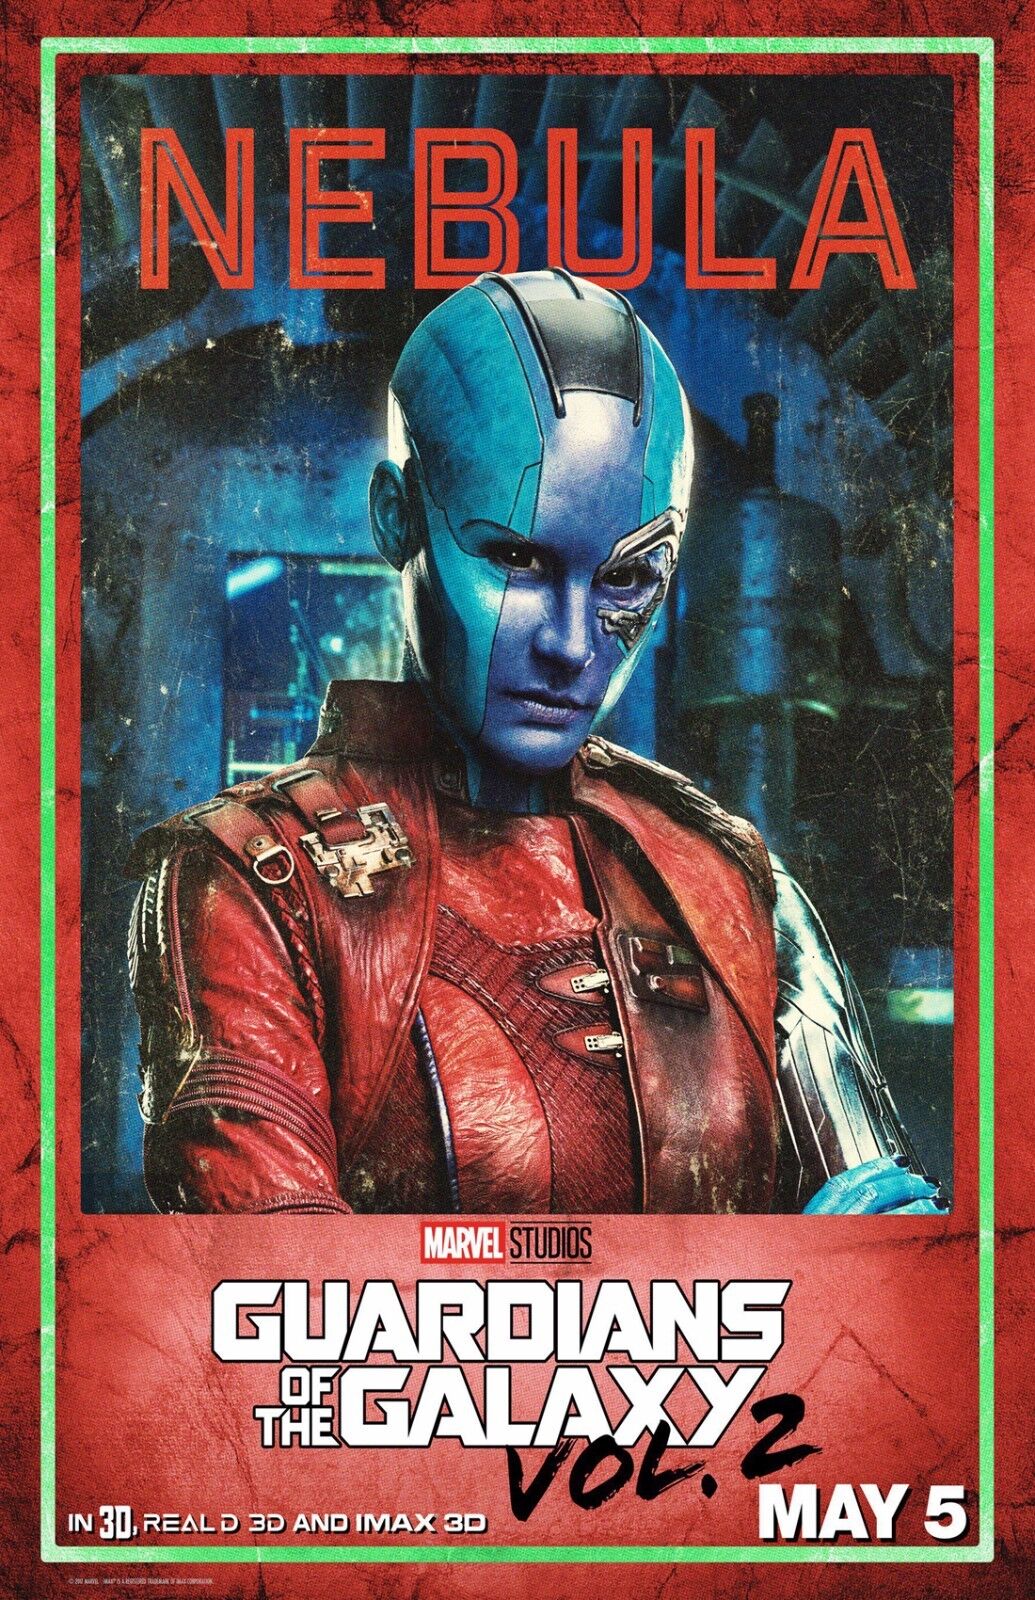 Guardians Of The Galaxy movie poster (vol. 2) x 17 inches (v4)